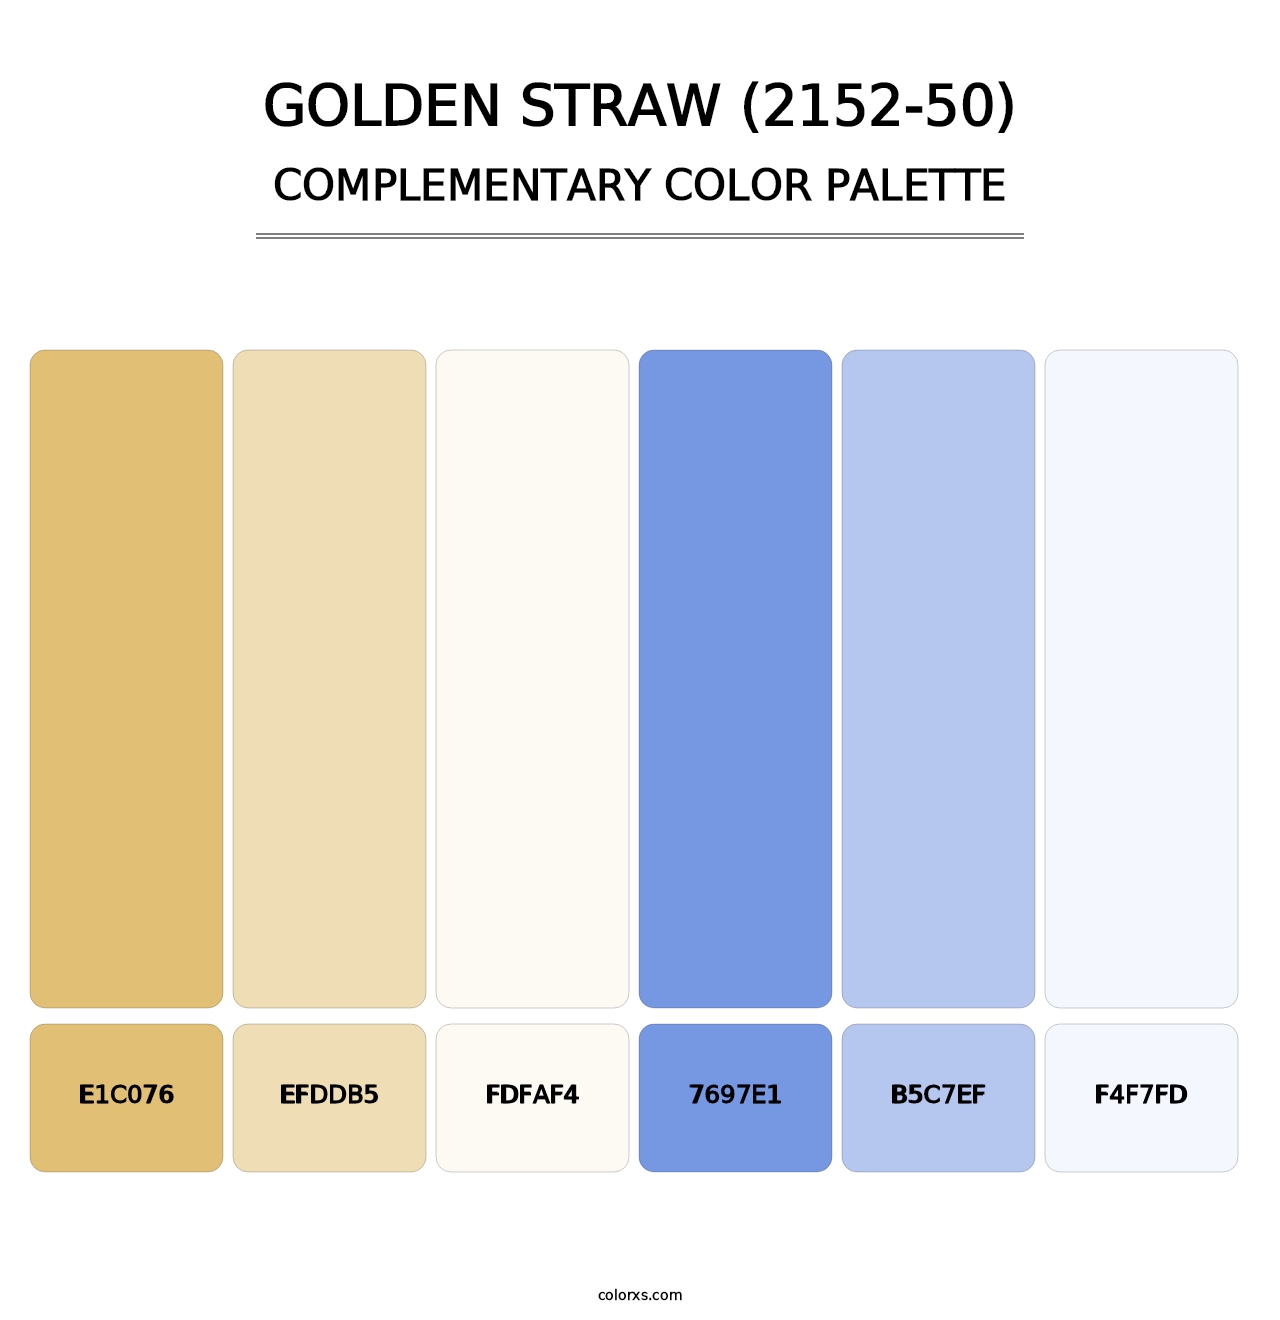 Golden Straw (2152-50) - Complementary Color Palette